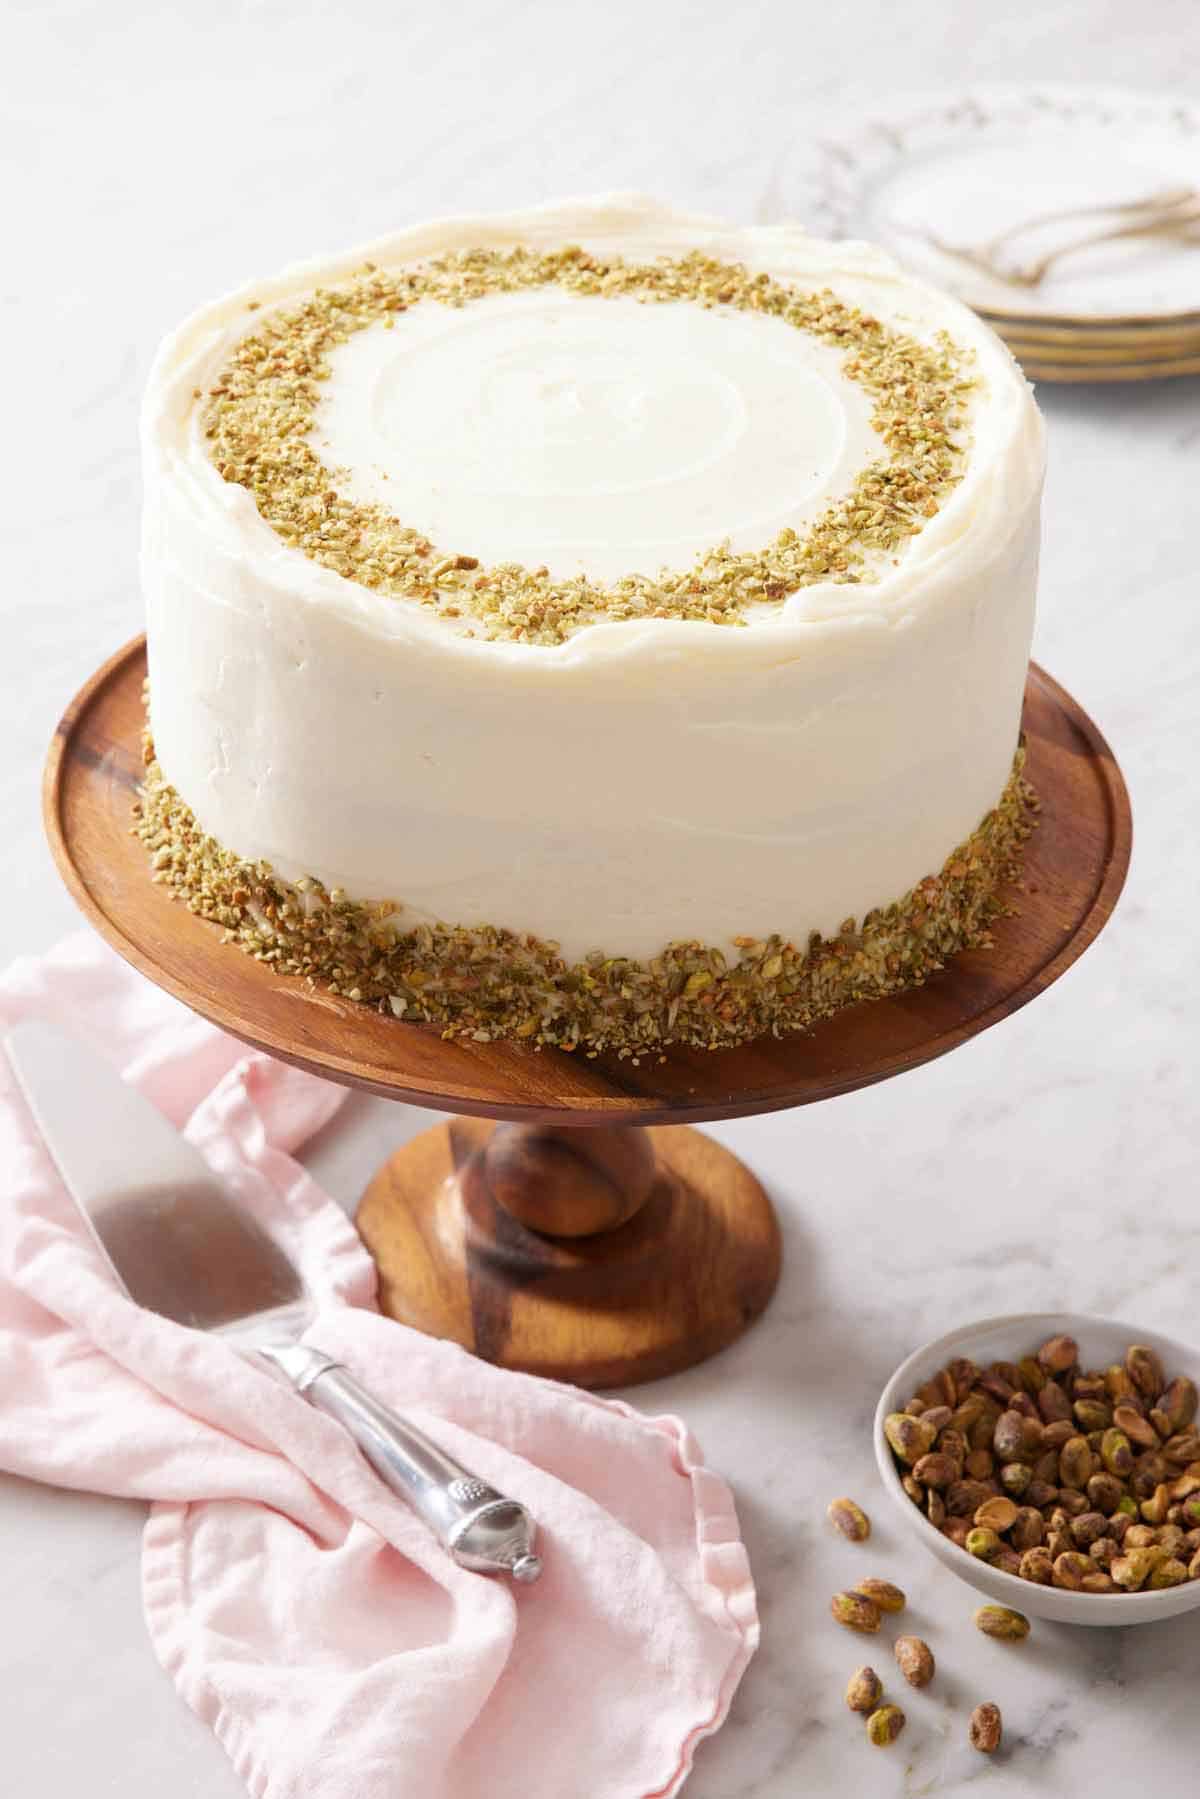 A pistachio cake on a wooden cake stand with a bowl of shelled pistachios on the side.